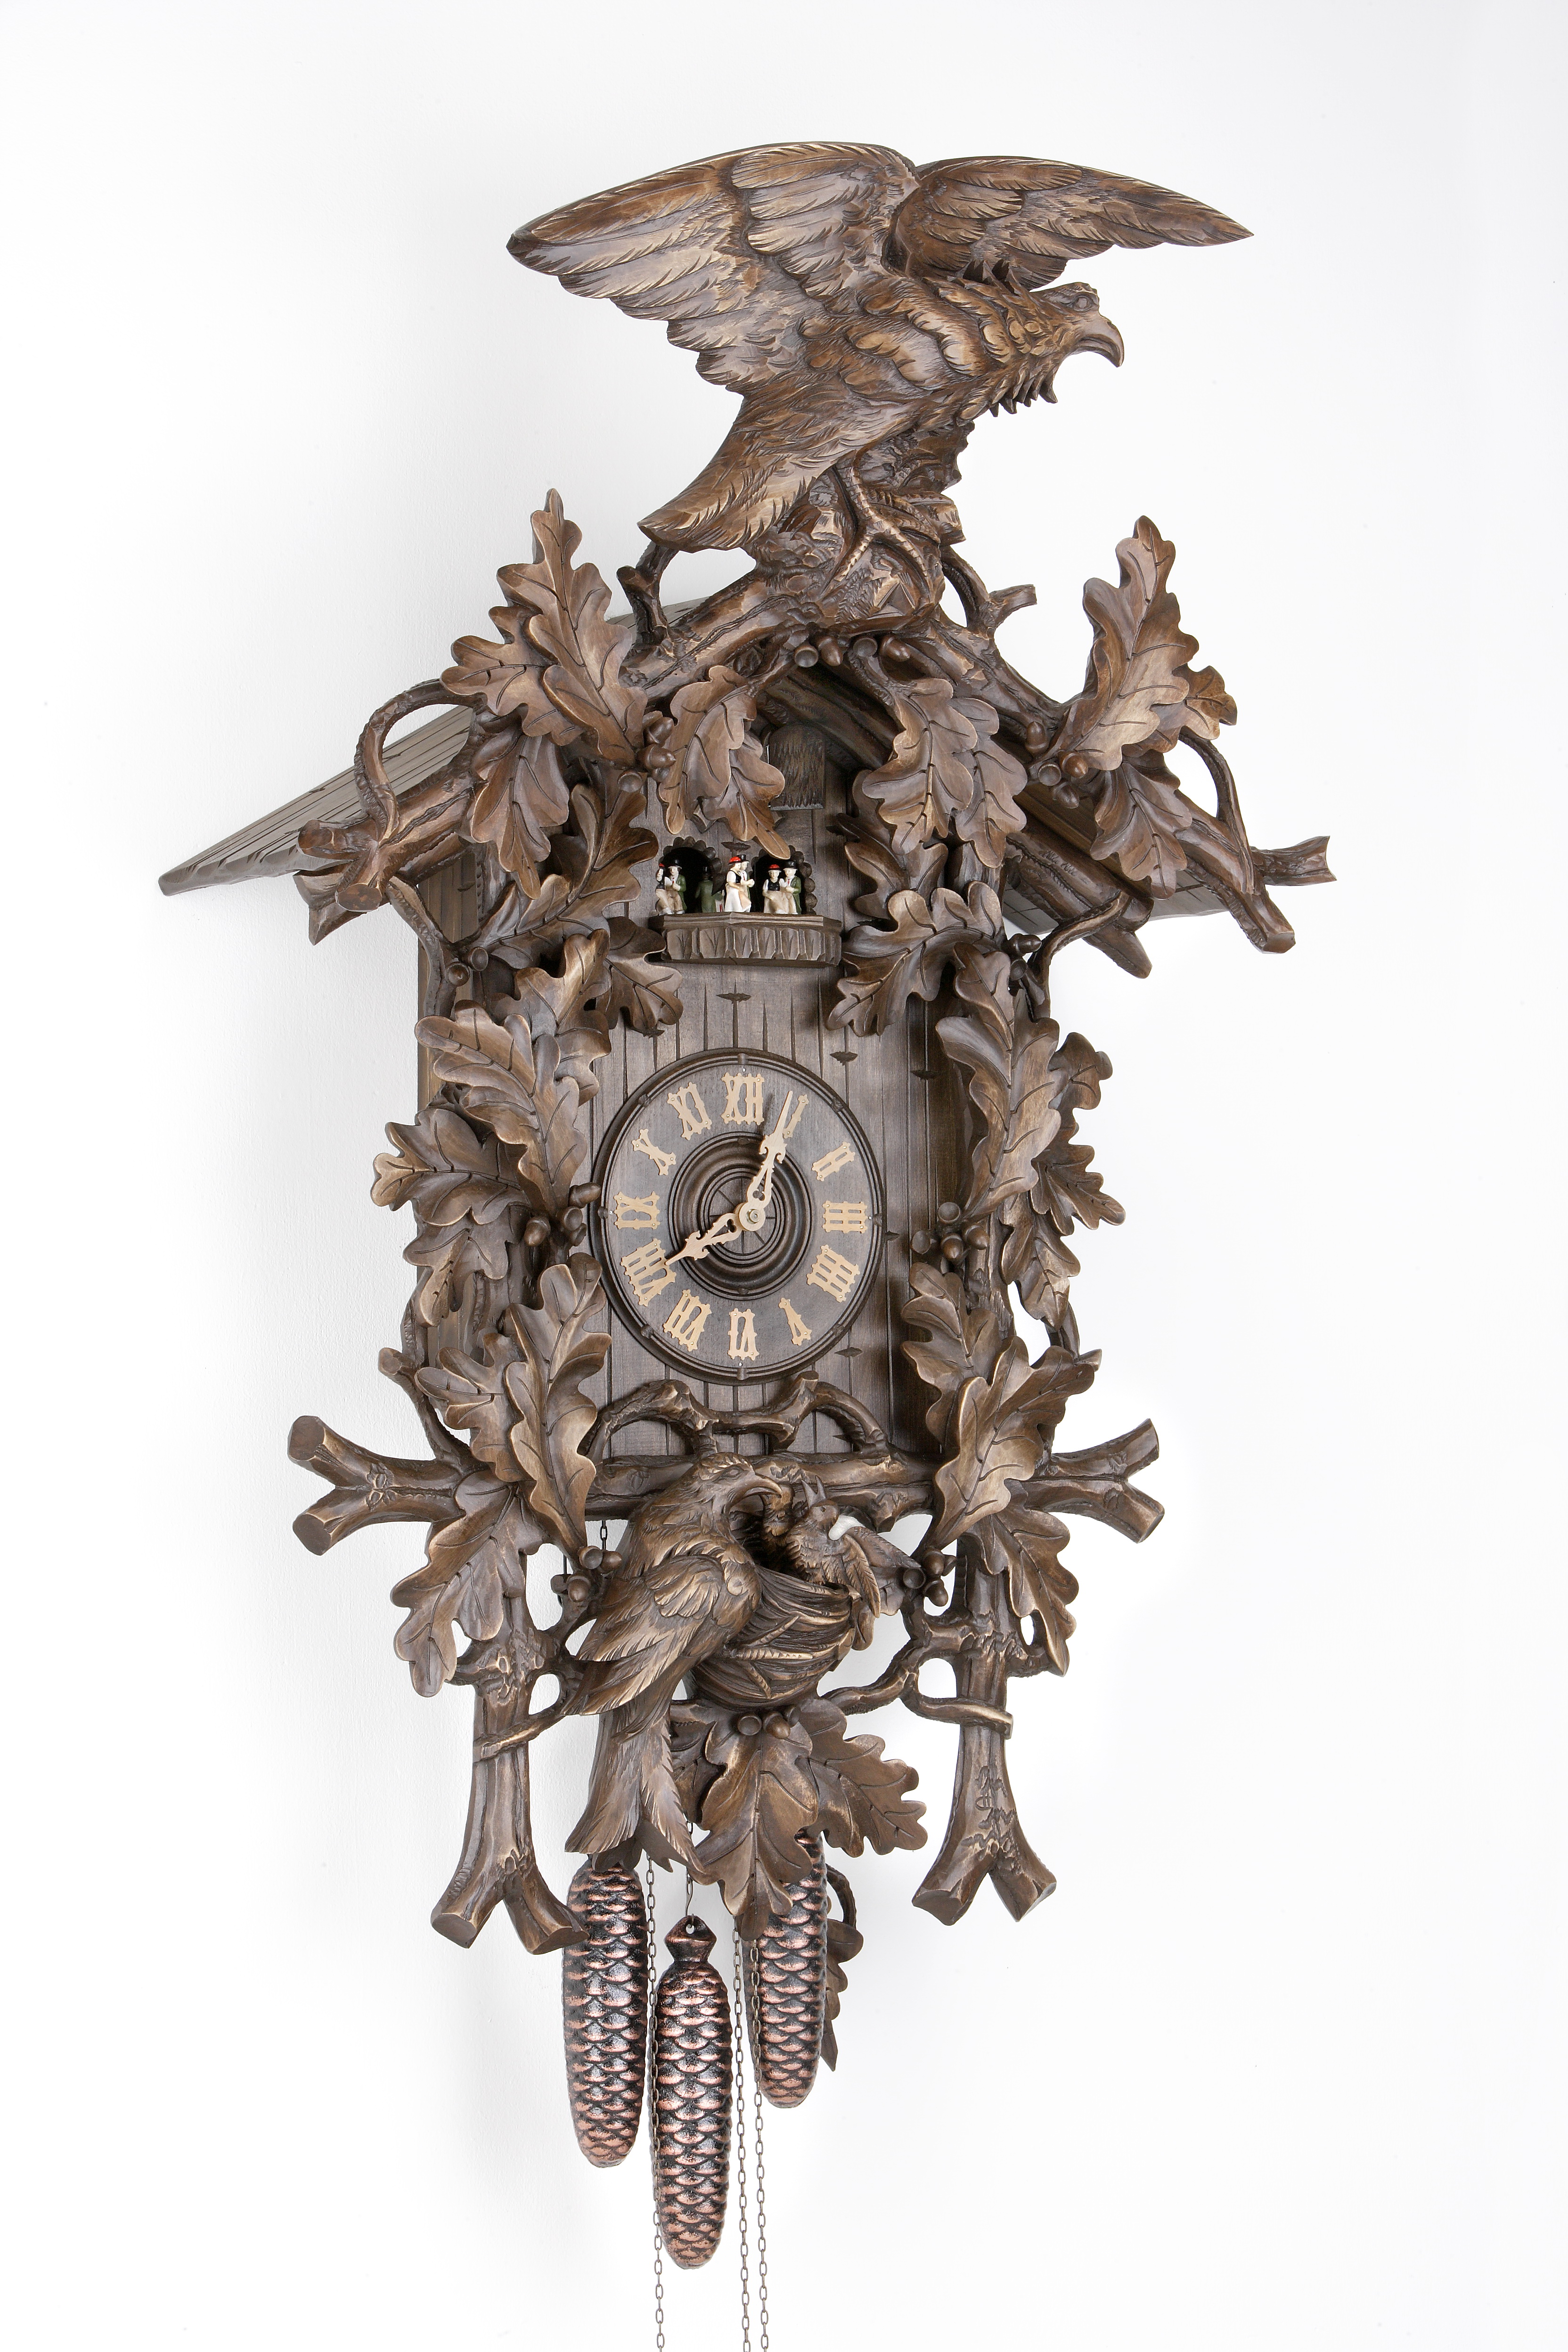 8 Days Music Dancer Cuckoo Clock with eagle and bird family